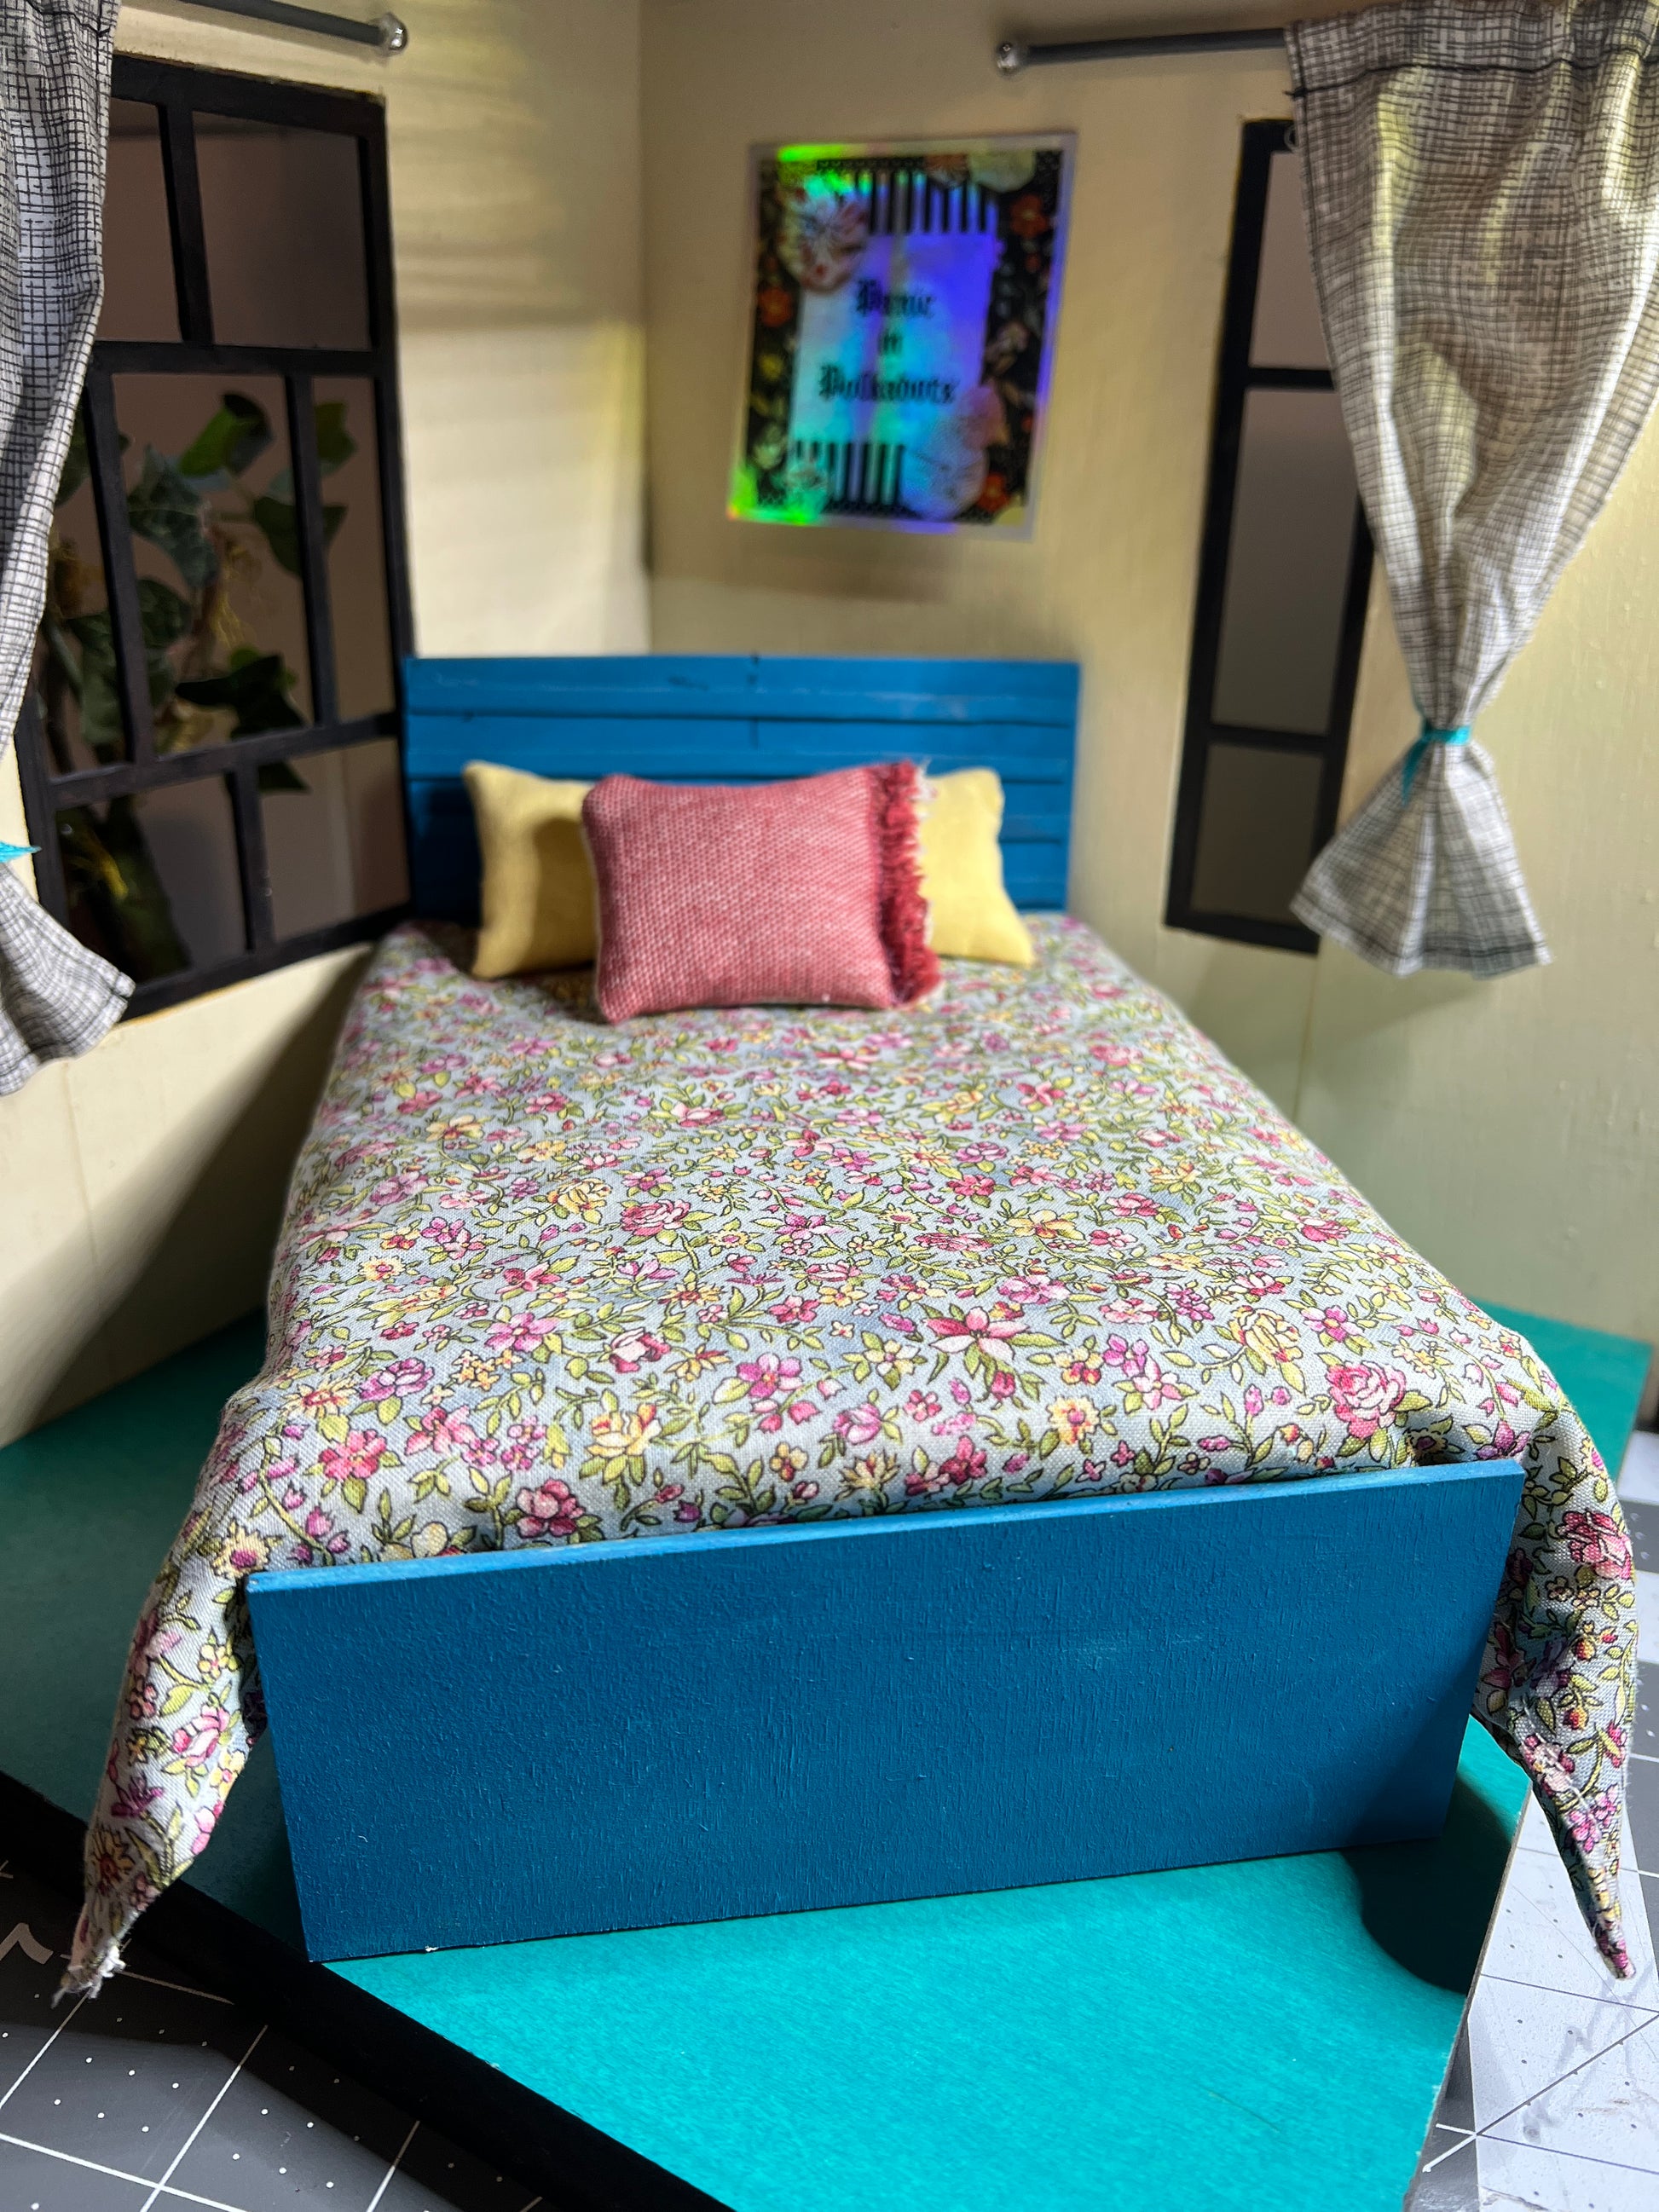 a miniature dollhouse bed, 1:12 scale, shown with comforter and pillows